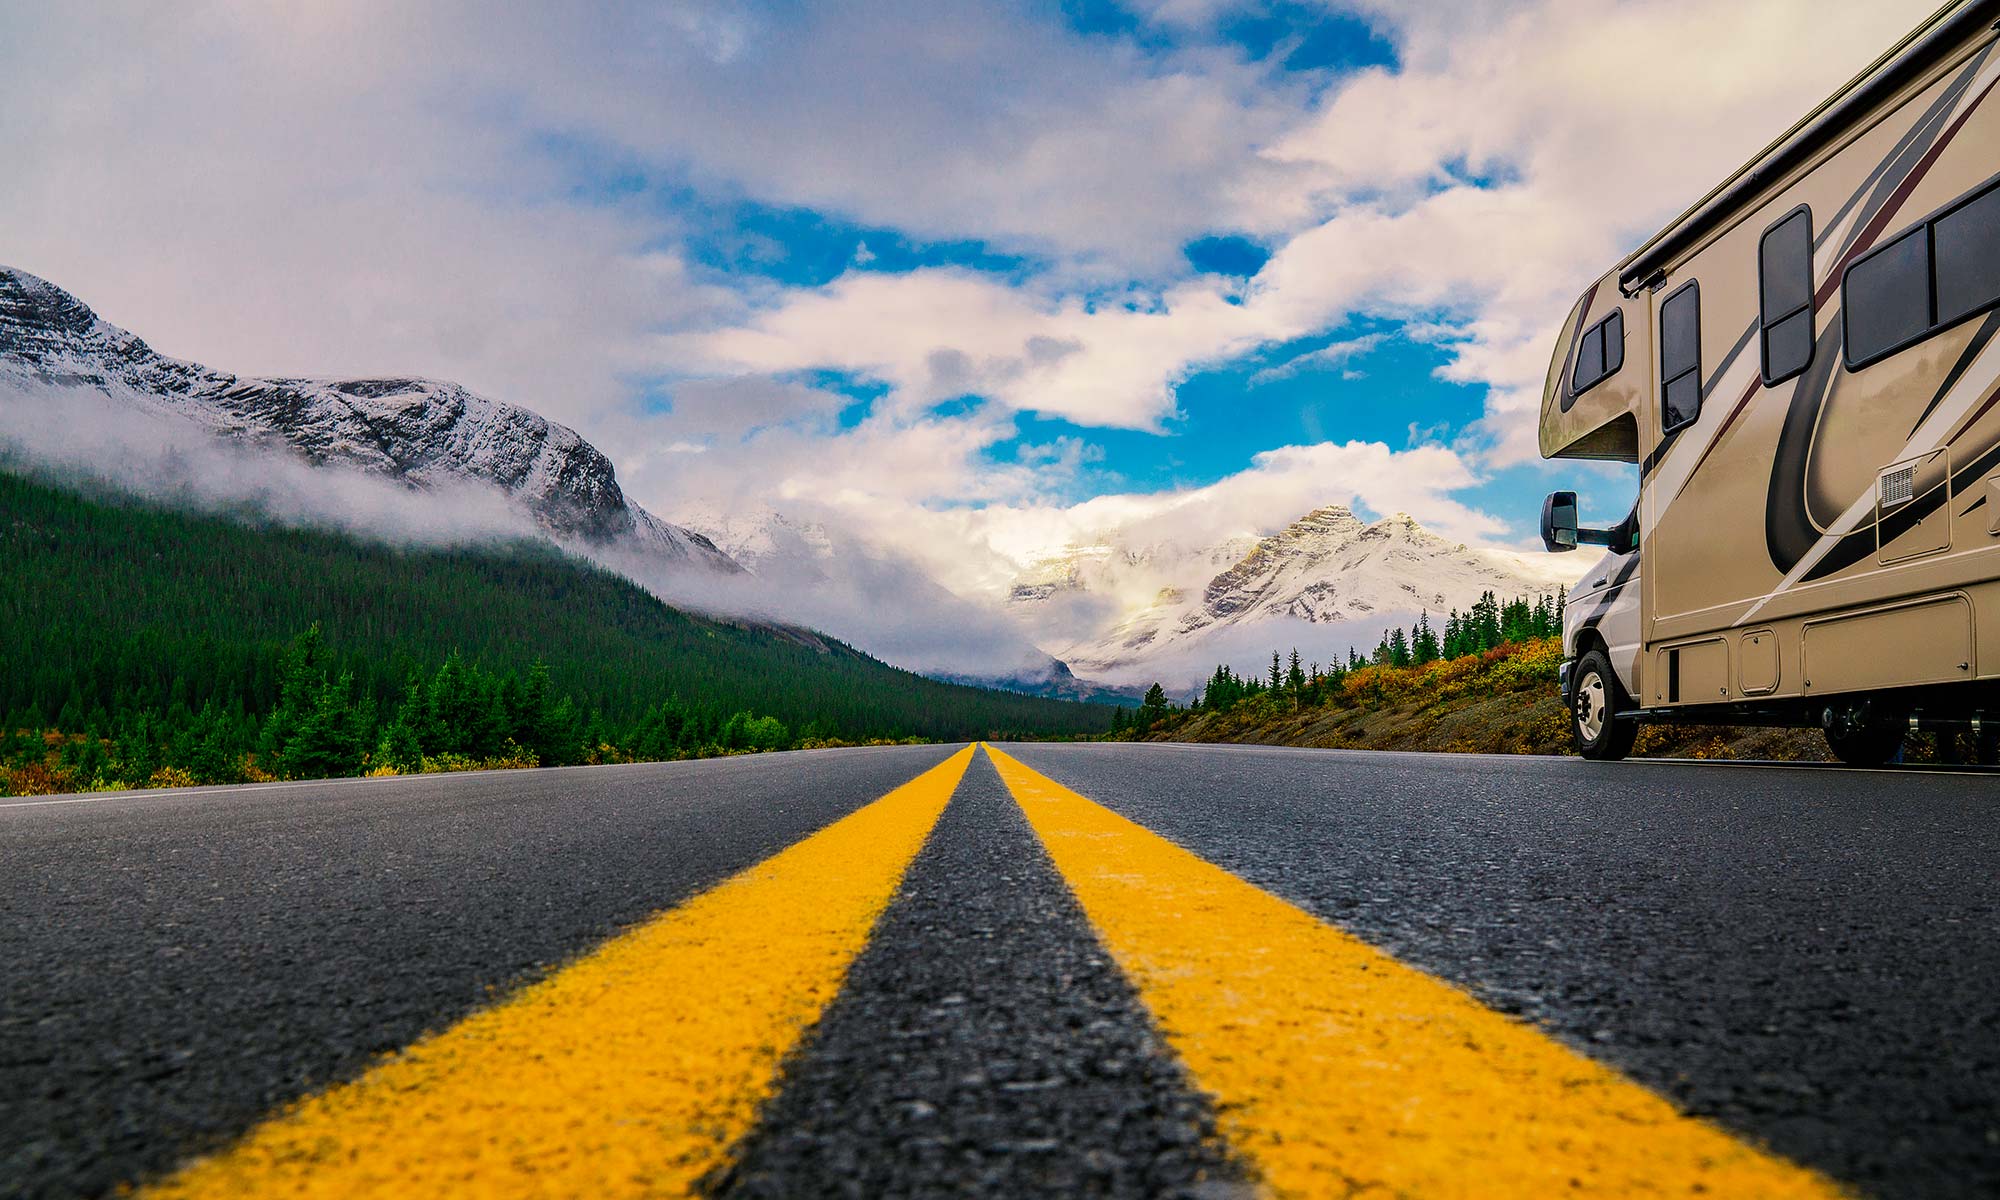 An RV drives down an open road with a scenic mountain view in the background.